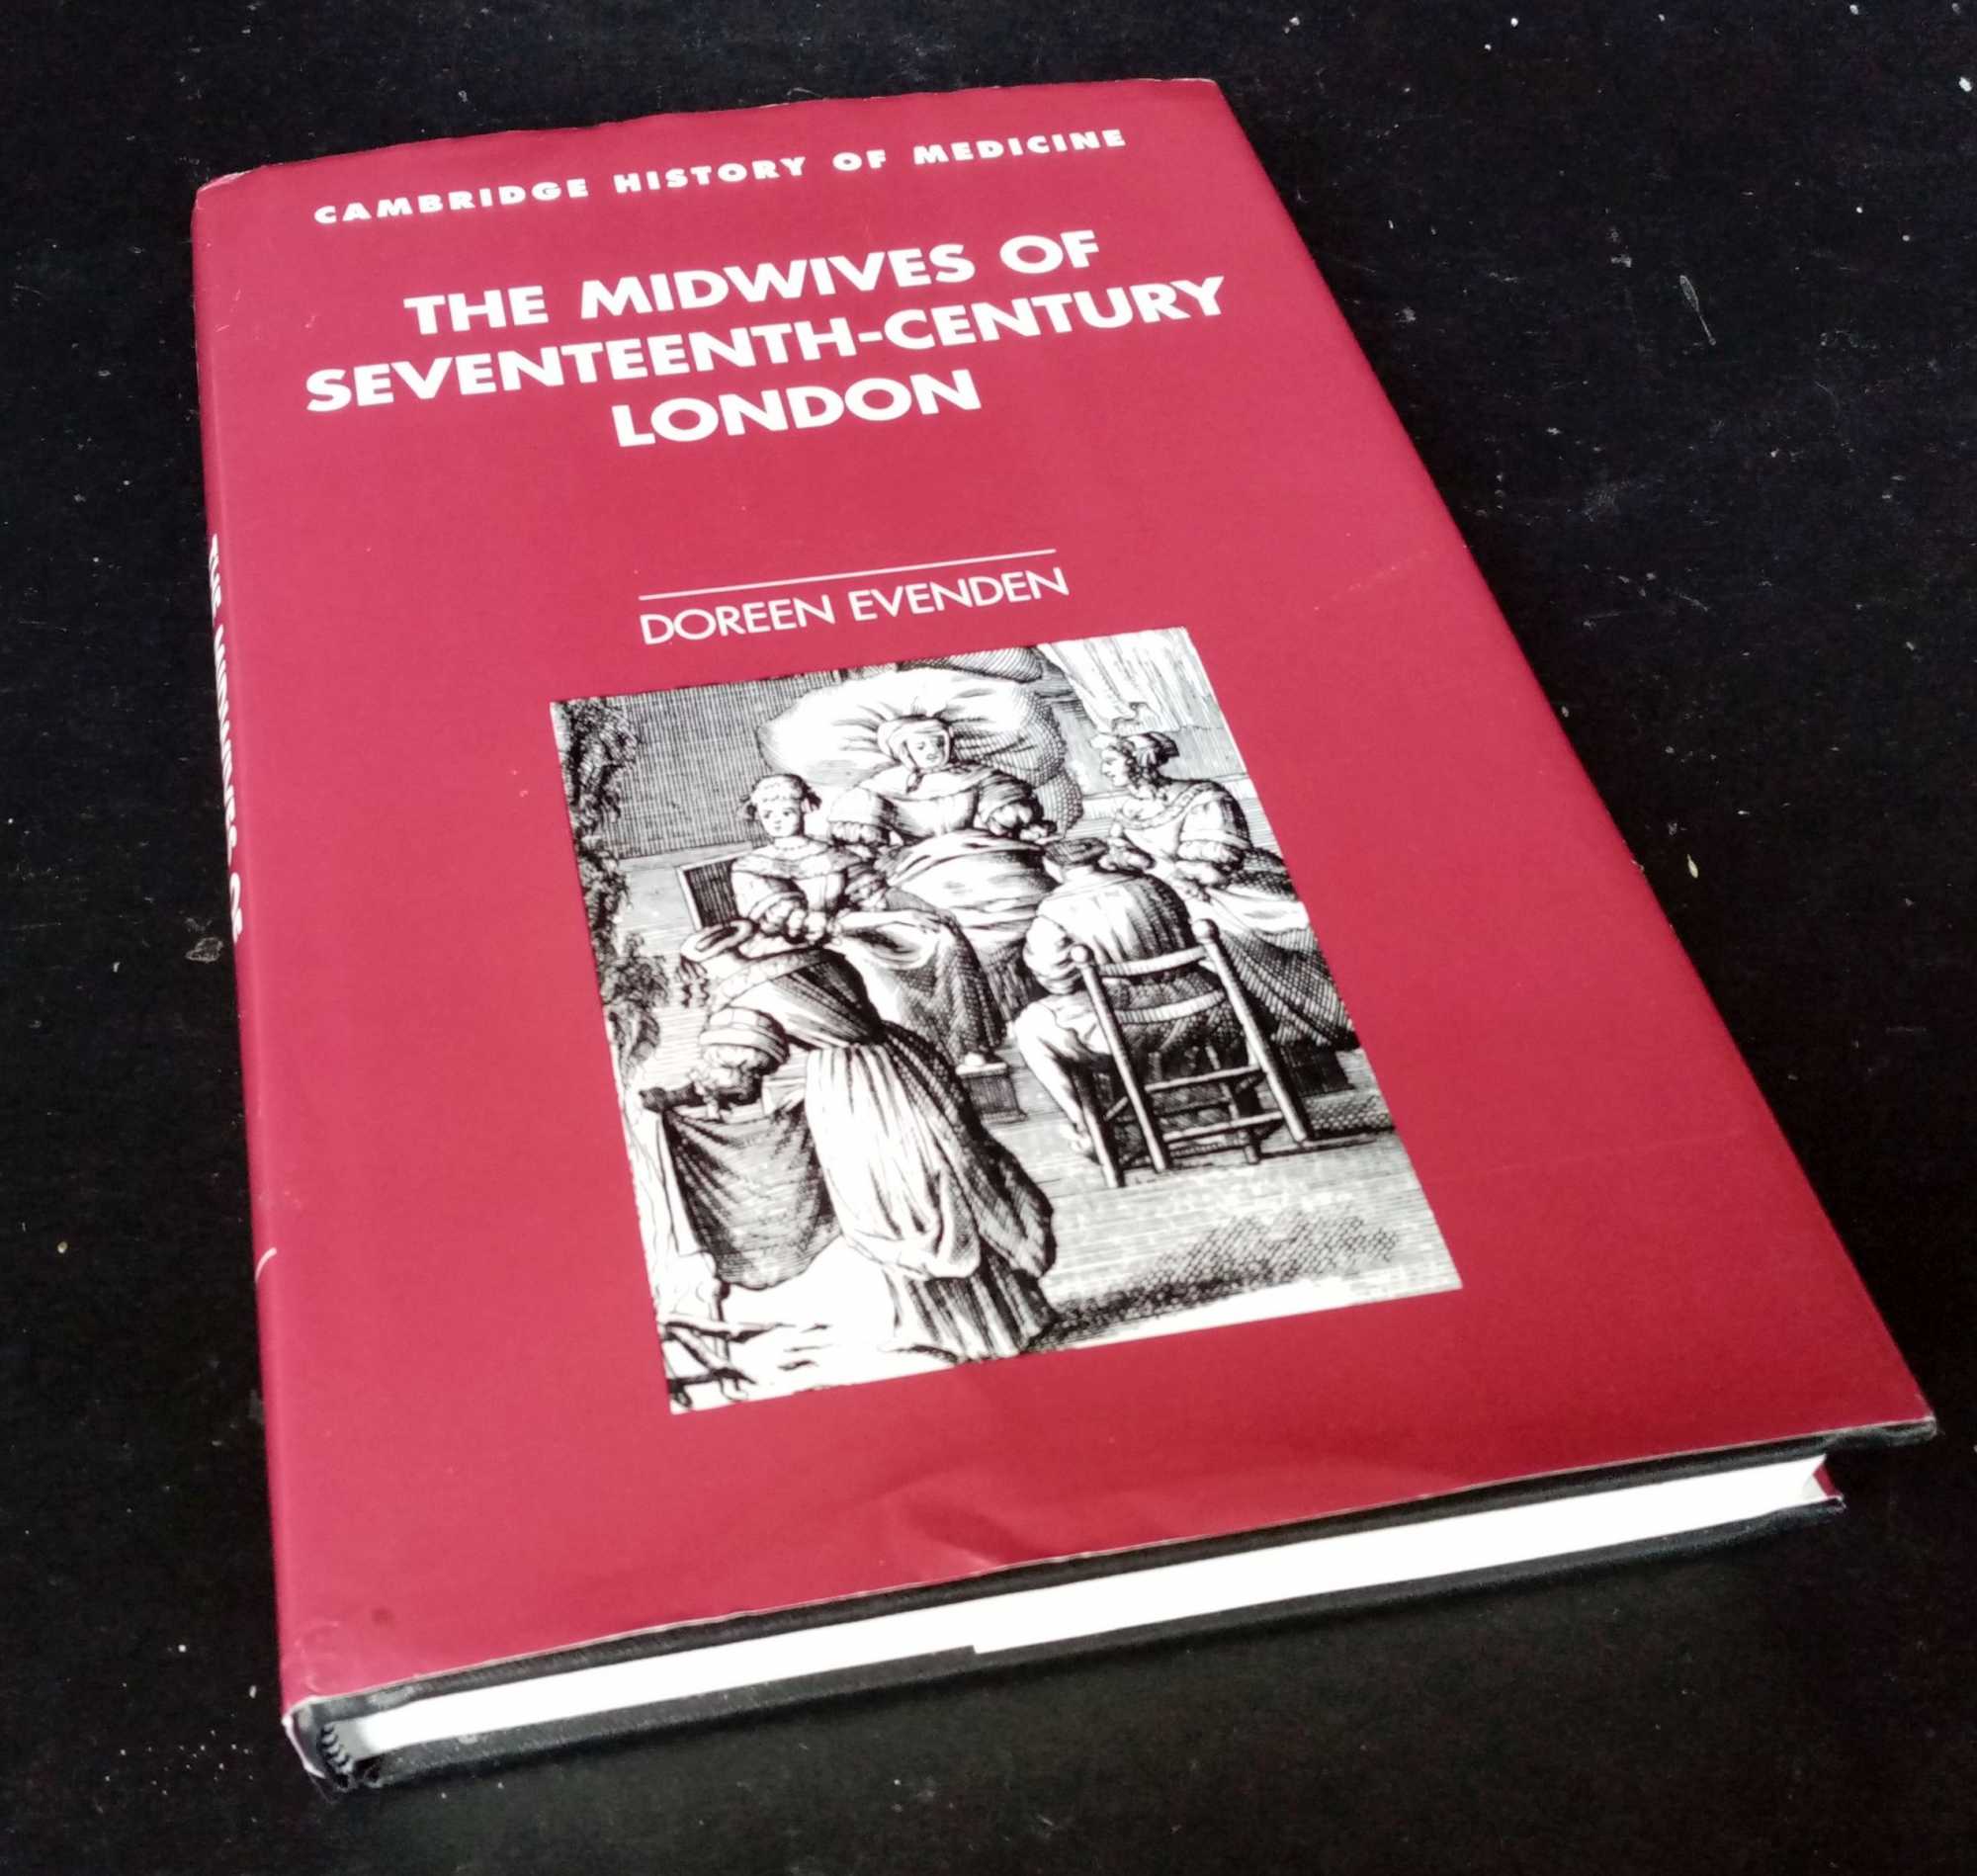 Doreen Evenden - The Midwives of Seventeenth-Century London